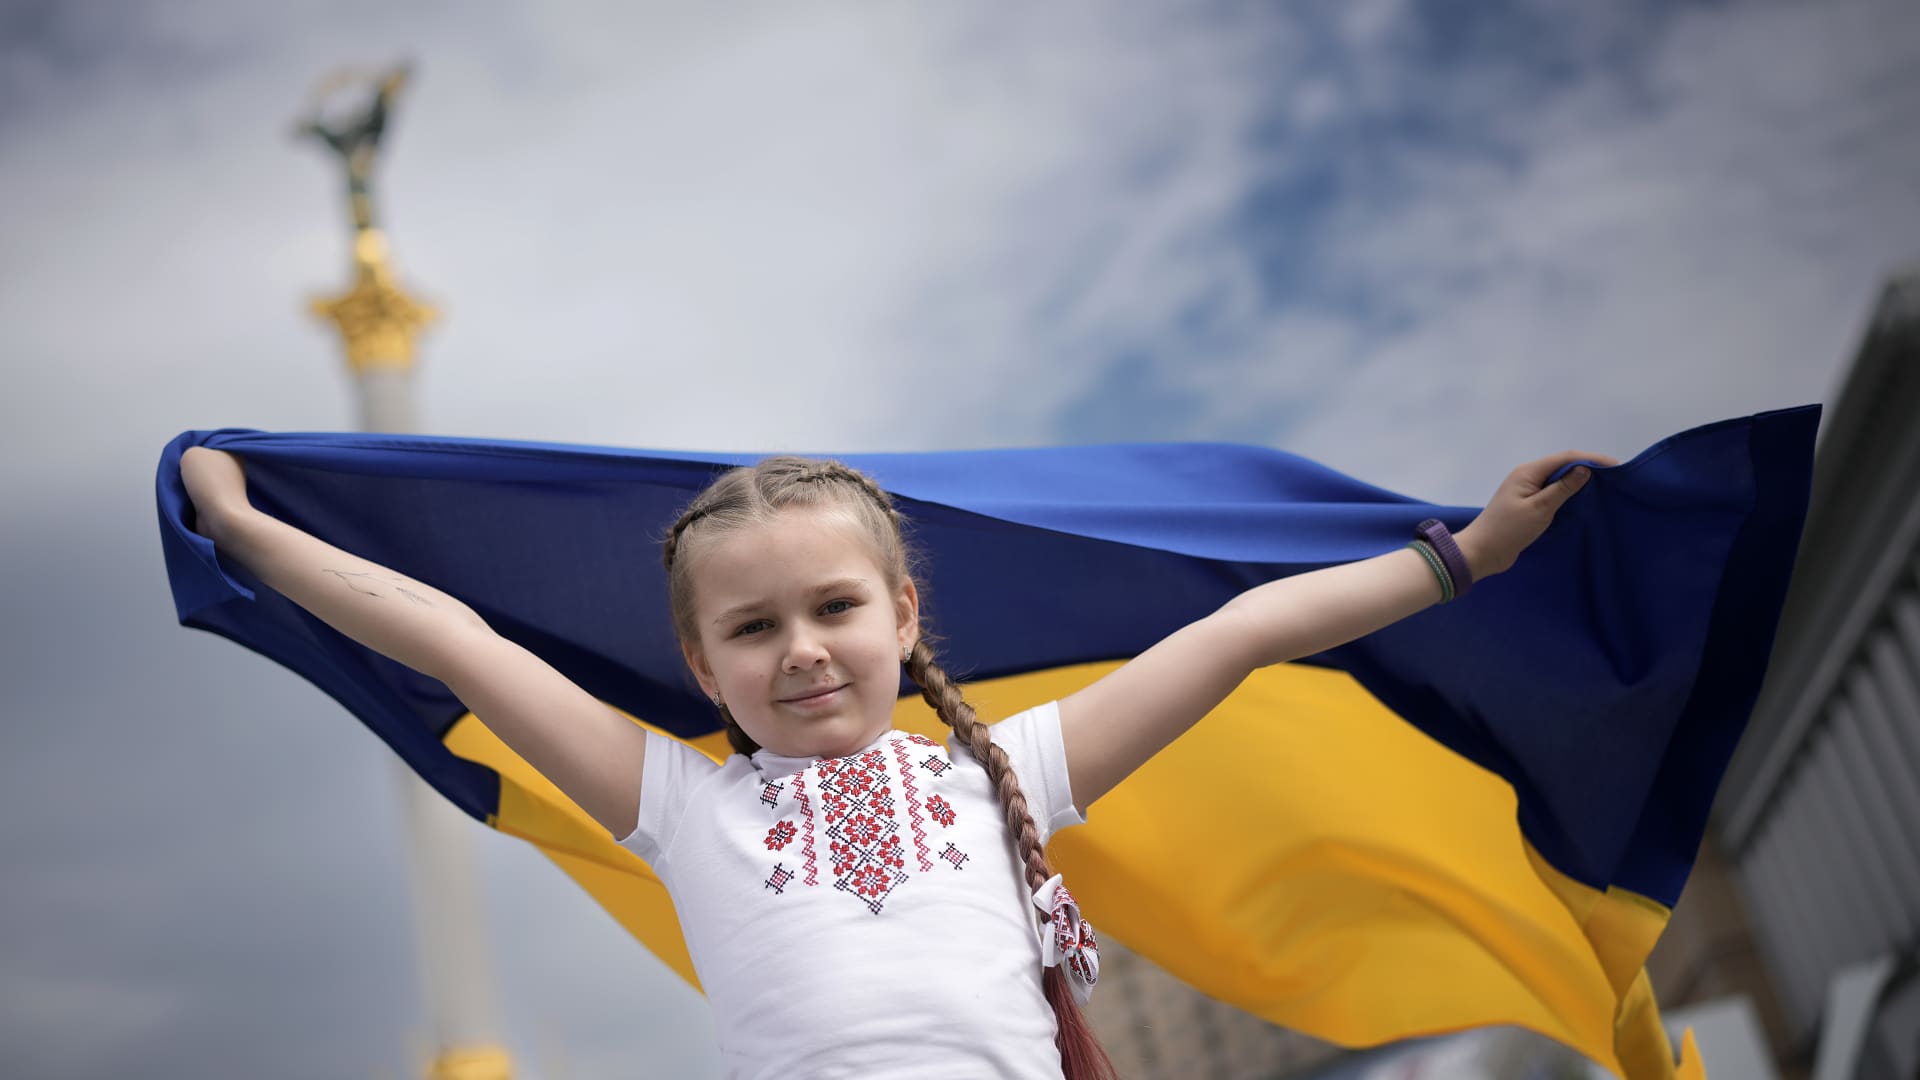 A young girl waves a Ukrainian flag and poses for her mothers camera as she celebrates World Vyshyvanka Day in central Kyiv on May 19, 2022 in Kyiv, Ukraine.